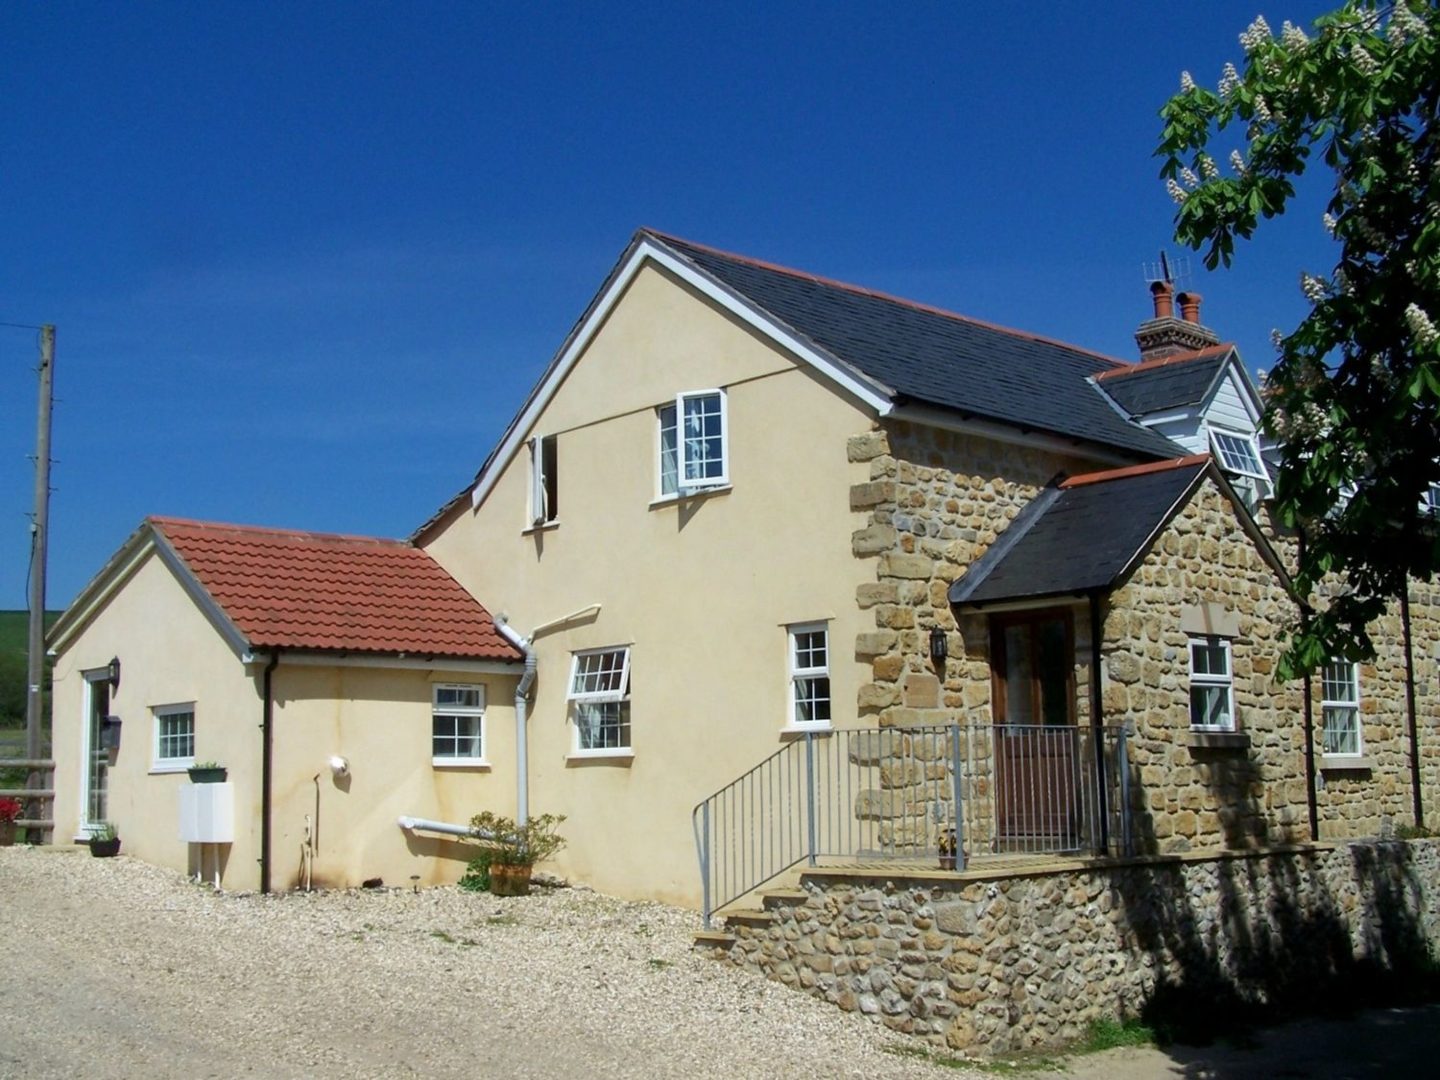 dog friendly cottages Dorset - West perry hay